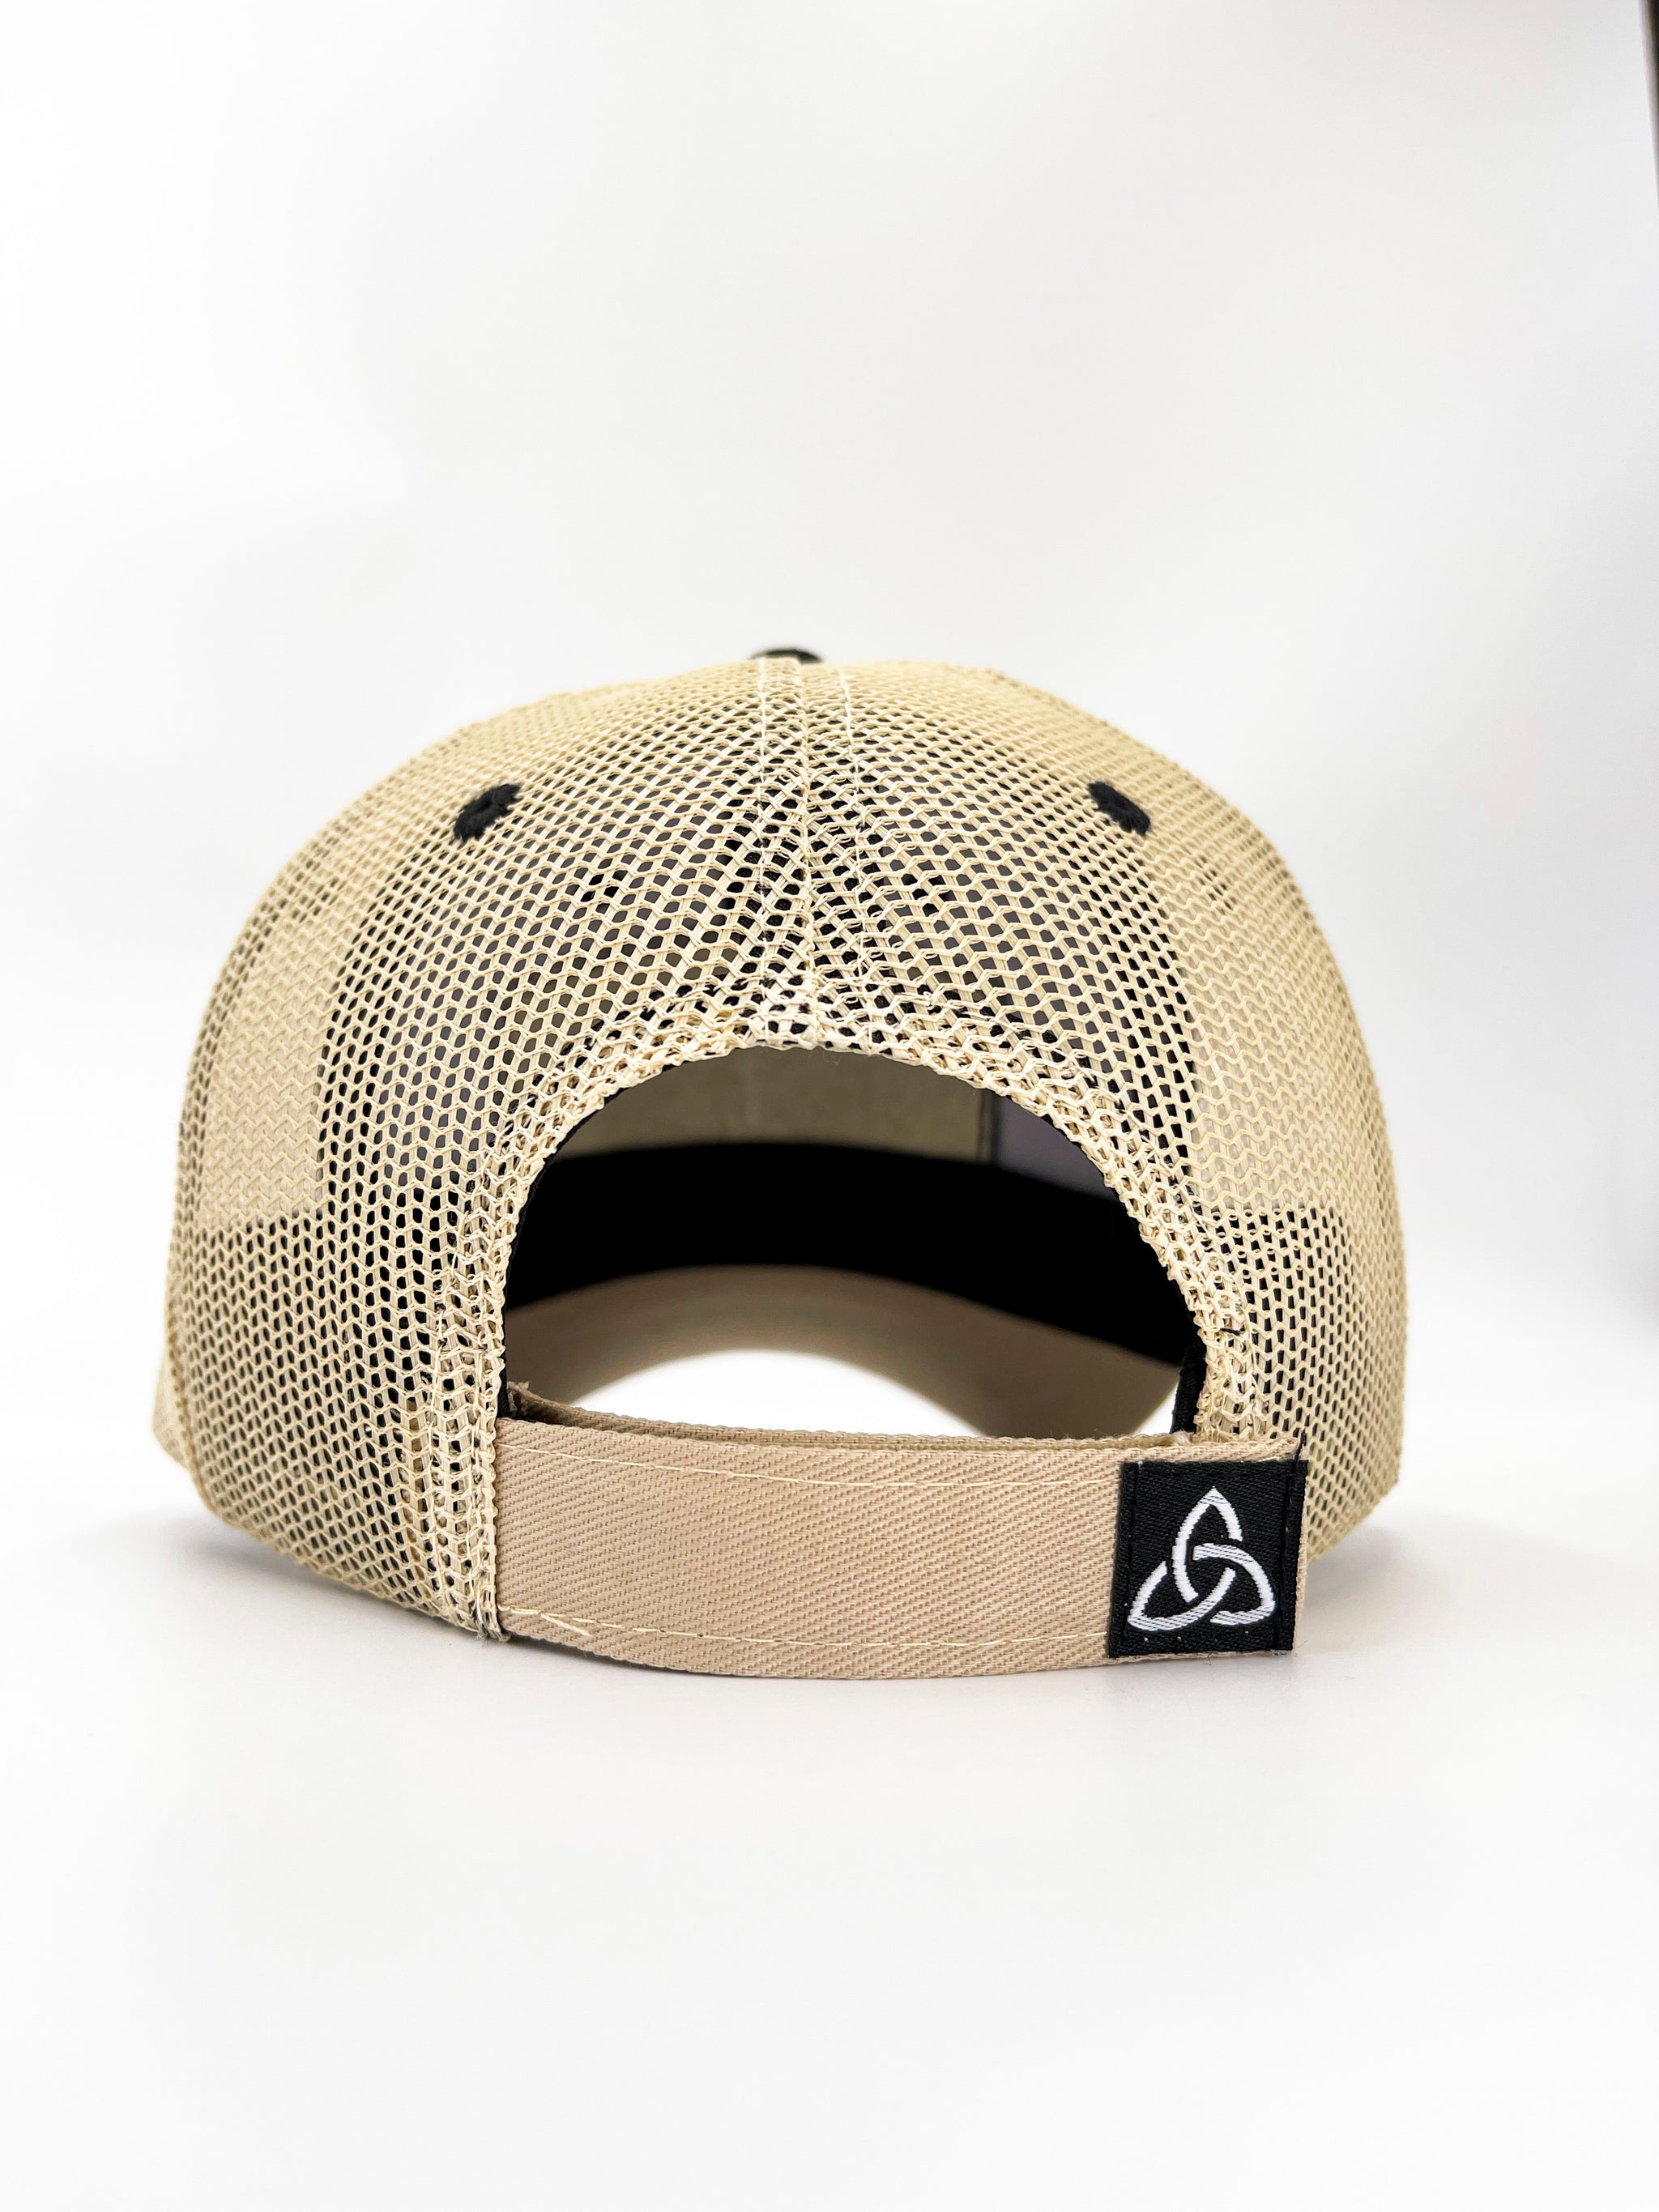 Straw and Mesh Baseball Hat in Tan